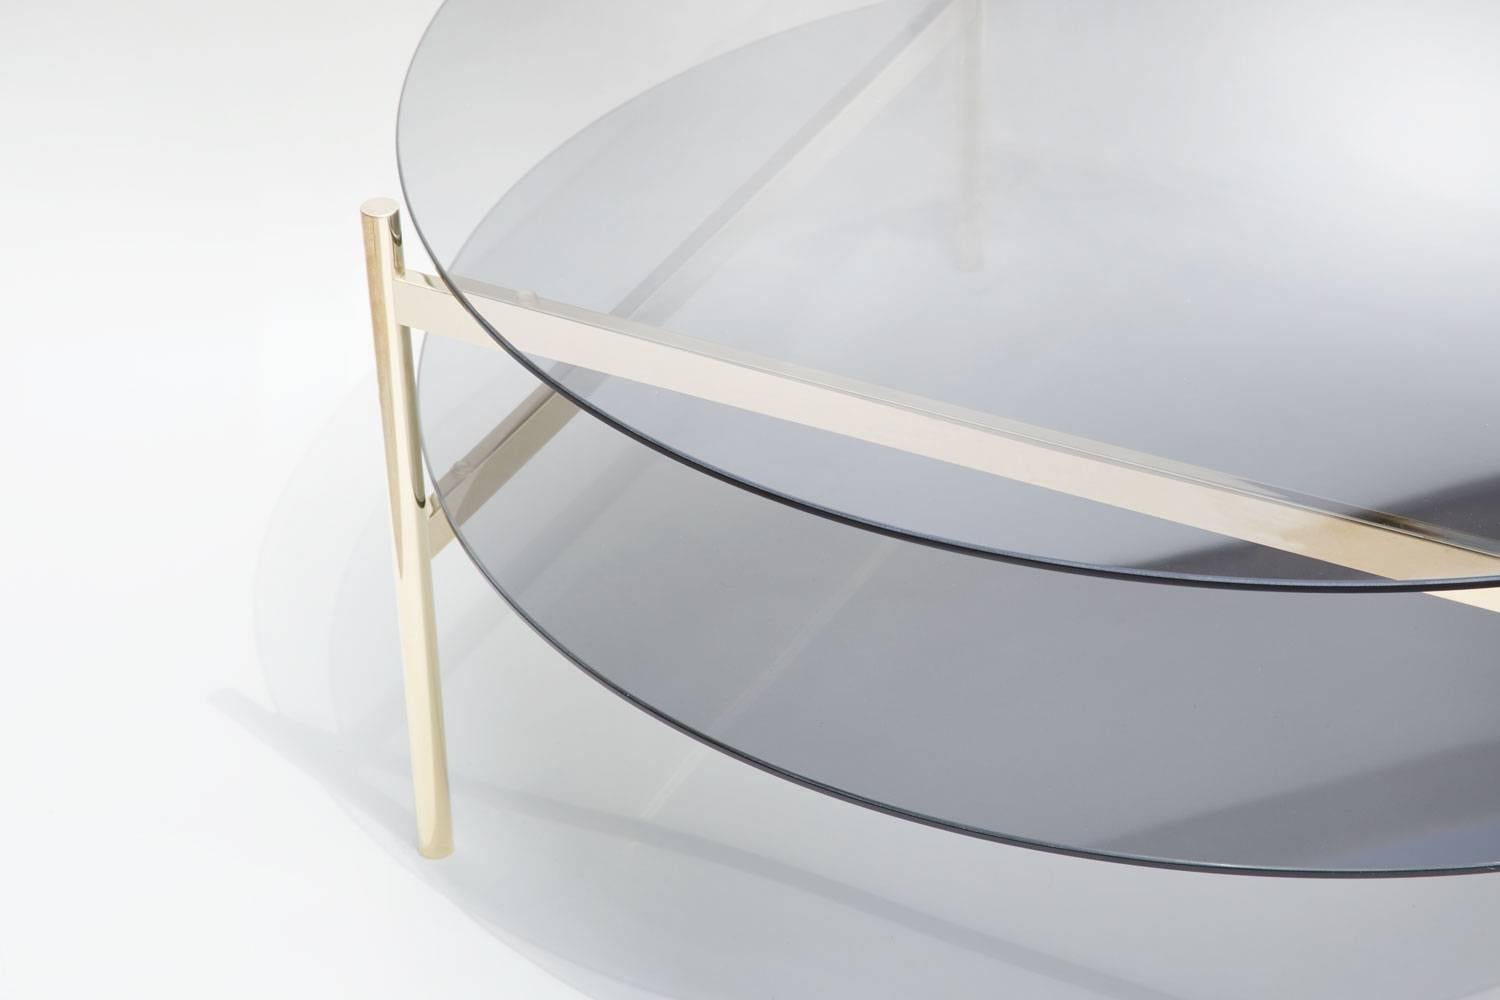 Made to order. Please allow 6 weeks for production.

Brass Frame / Smoked Glass / Smoked Glass

The Duotone Furniture series is based on a modular hardware system that pairs sturdy construction with visual lightness and a range of potential